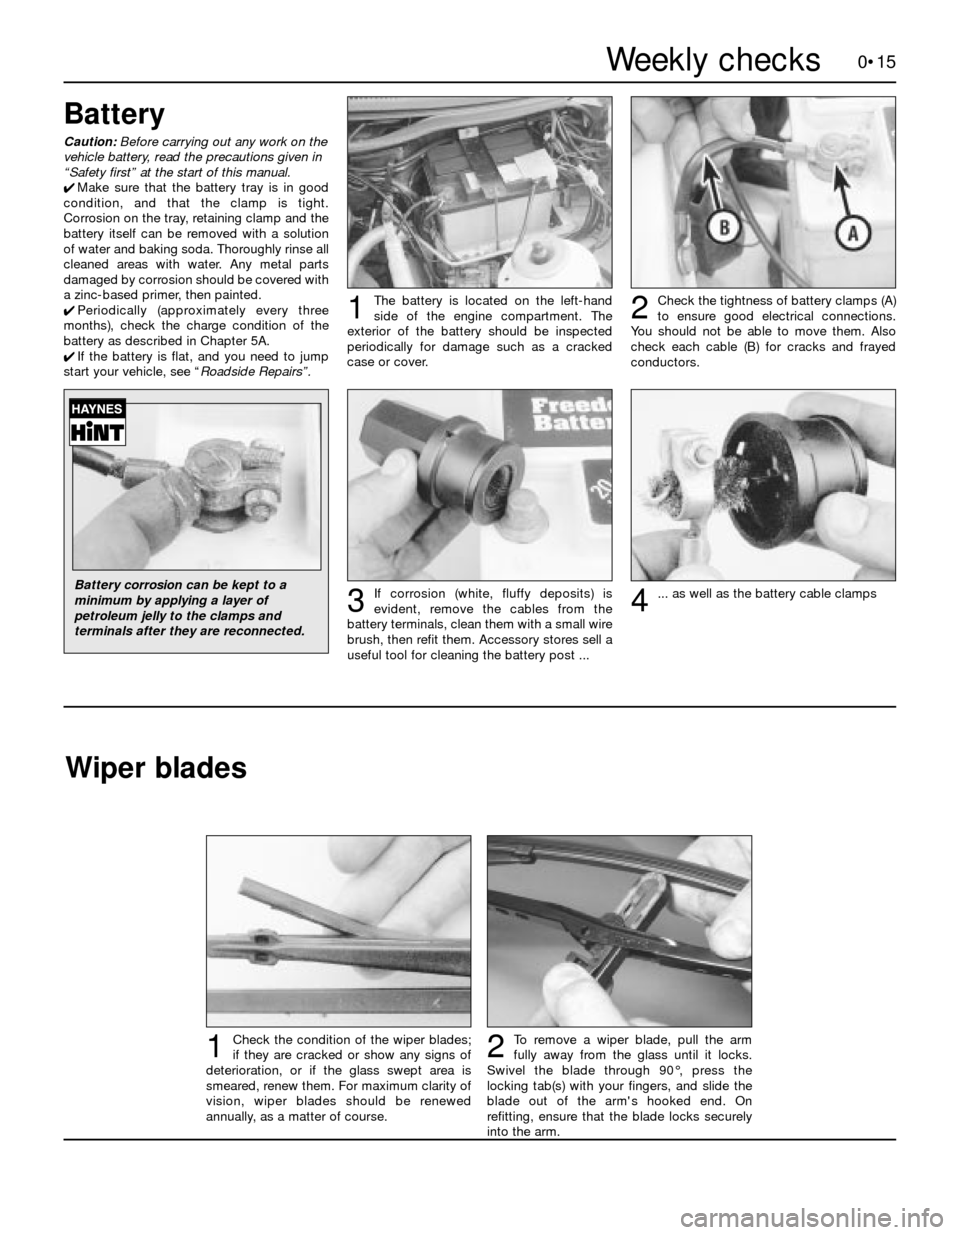 FORD SIERRA 1989 2.G Introduction Workshop Manual 0•15
To remove a wiper blade, pull the arm
fully away from the glass until it locks.
Swivel the blade through 90°, press the
locking tab(s) with your fingers, and slide the
blade out of the arms h